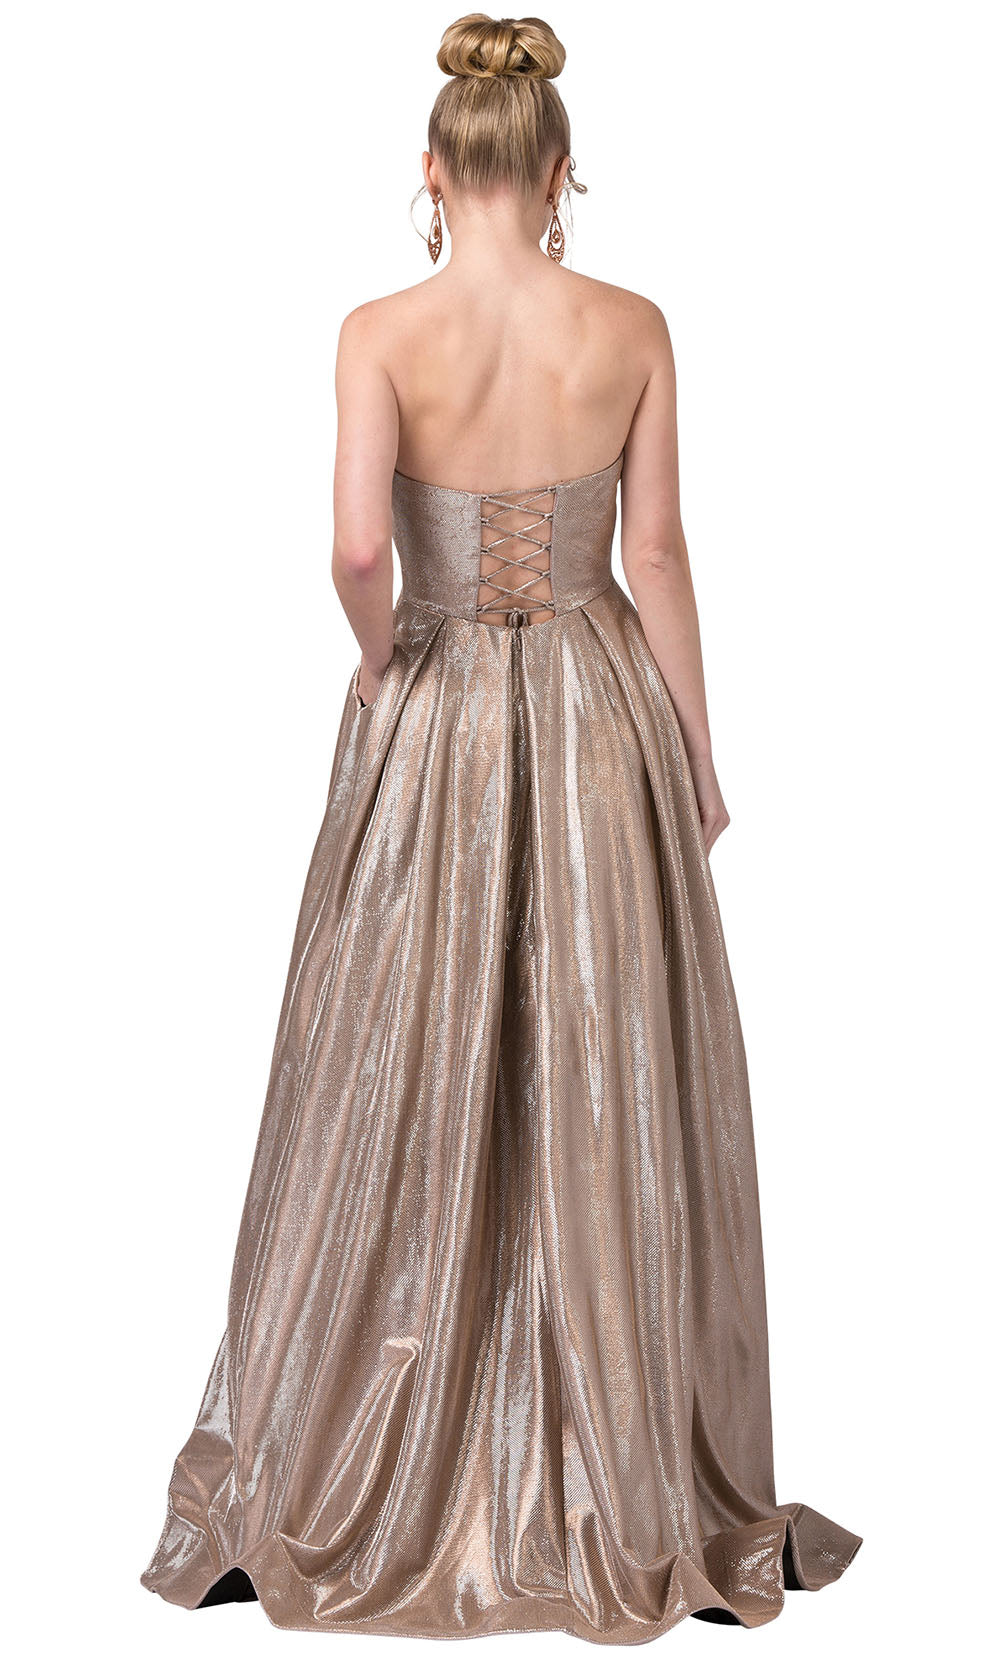 Dancing Queen - 2651 Strapless Shimmer Metallic A-Line Gown In Champagne & Gold